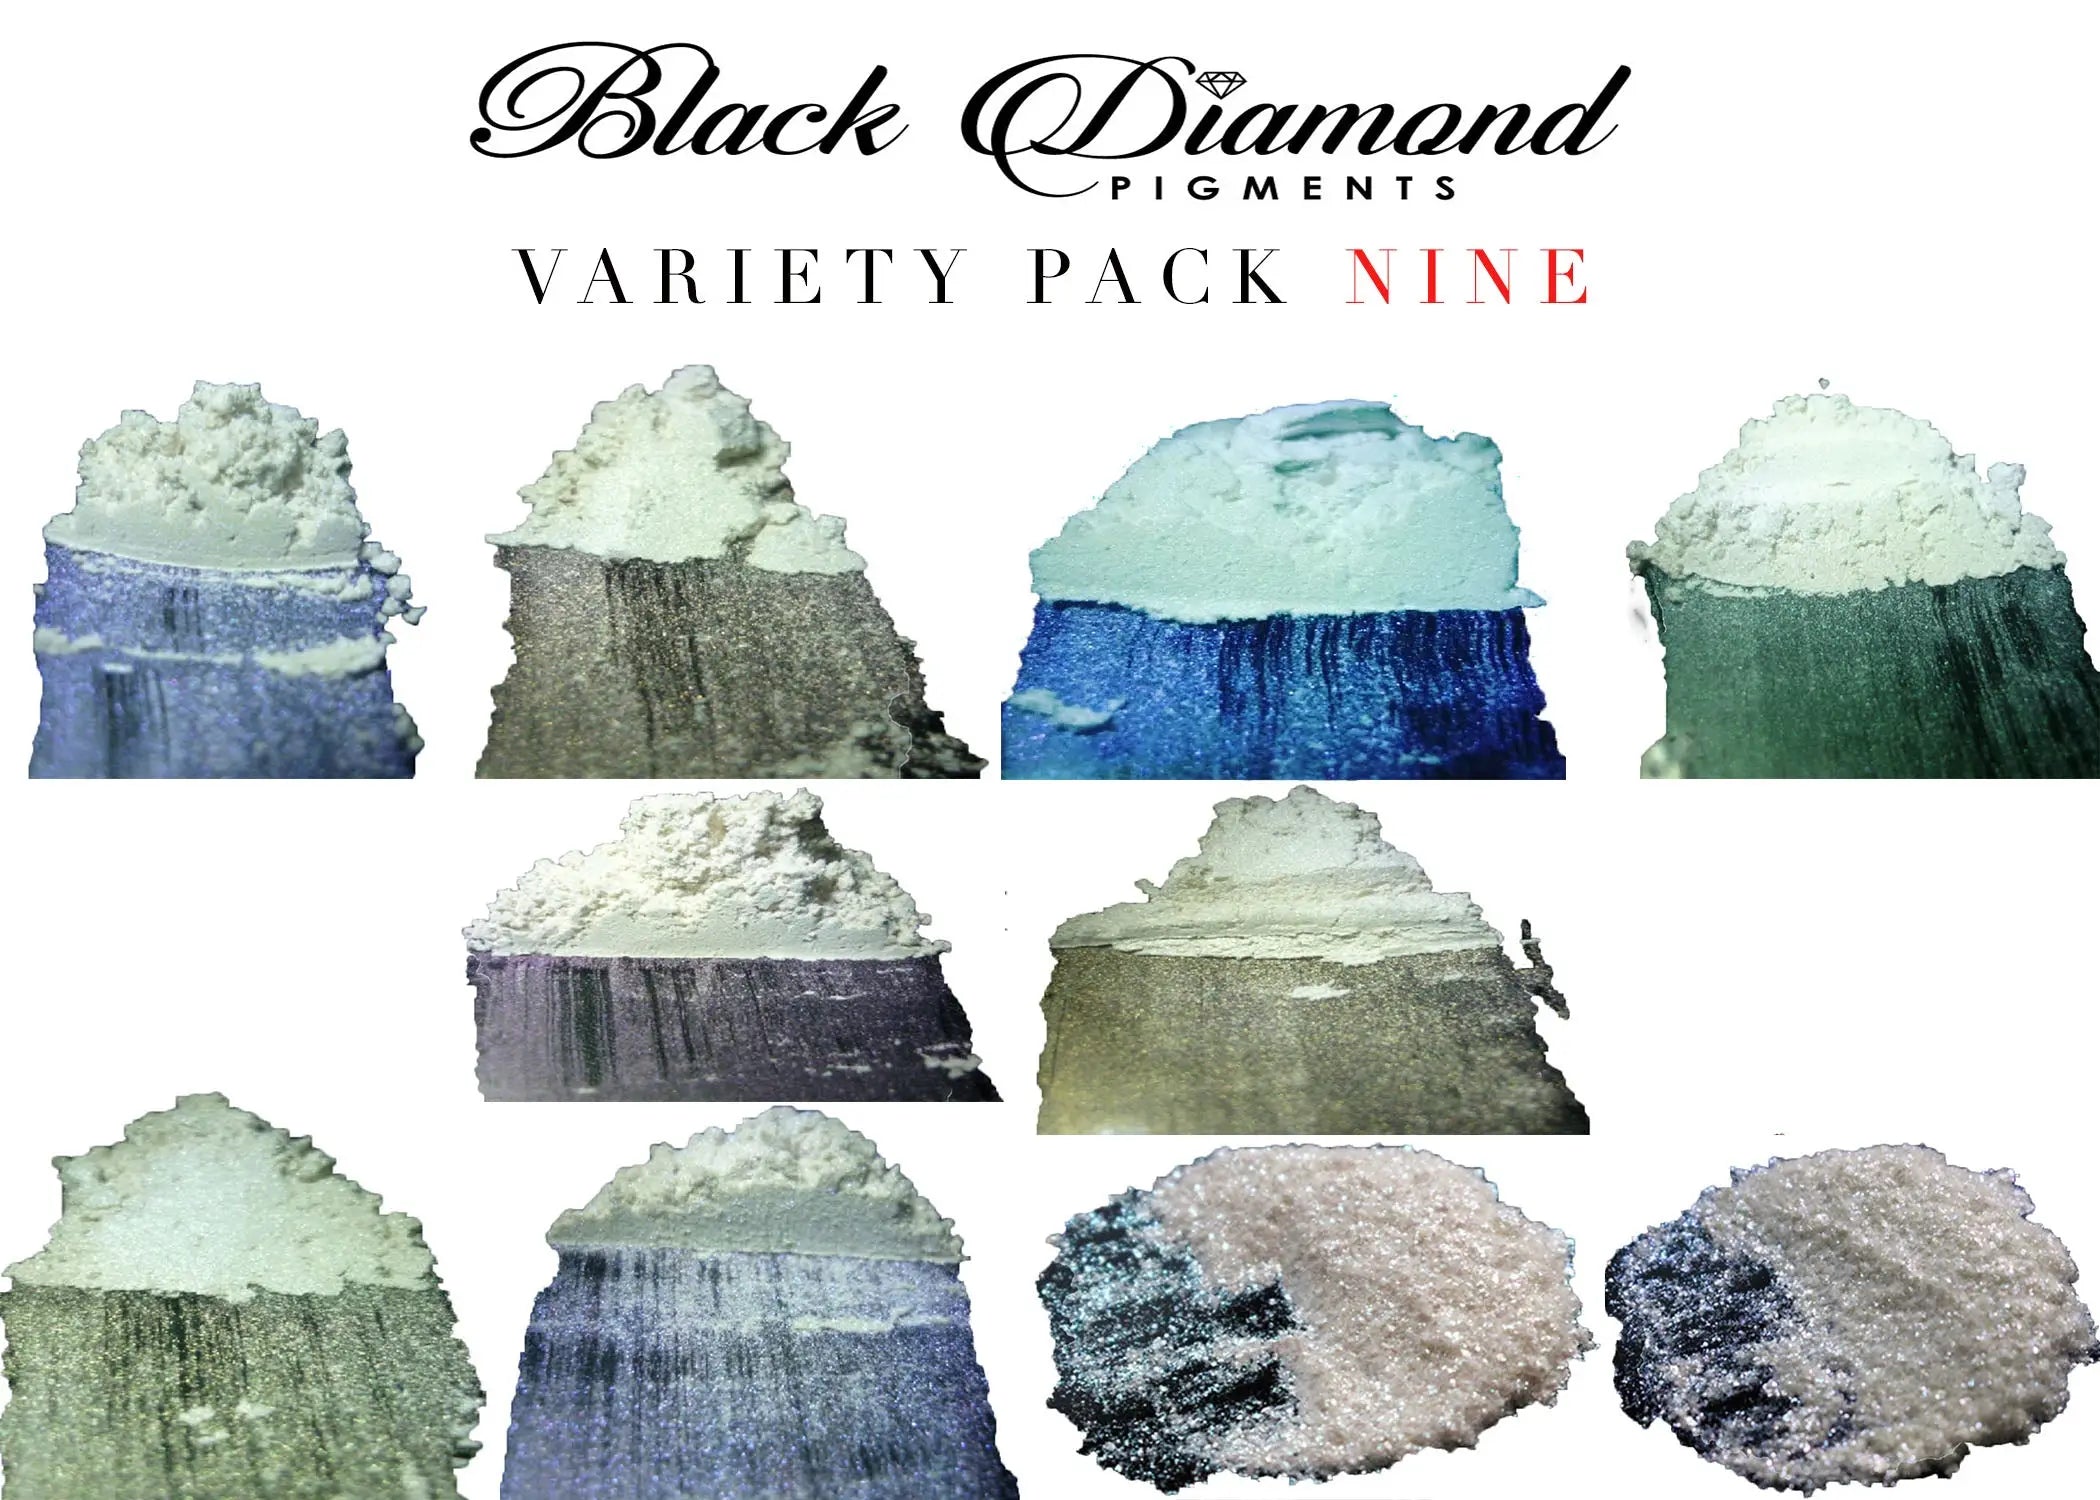 "MICA PIGMENT BOX 1" (7 VARIETY PACKS) 70-5g packs TOTAL including GHOST pigments (Epoxy,Slime,Resin,Soap) Black Diamond Pigments® - Black Diamond Pigments